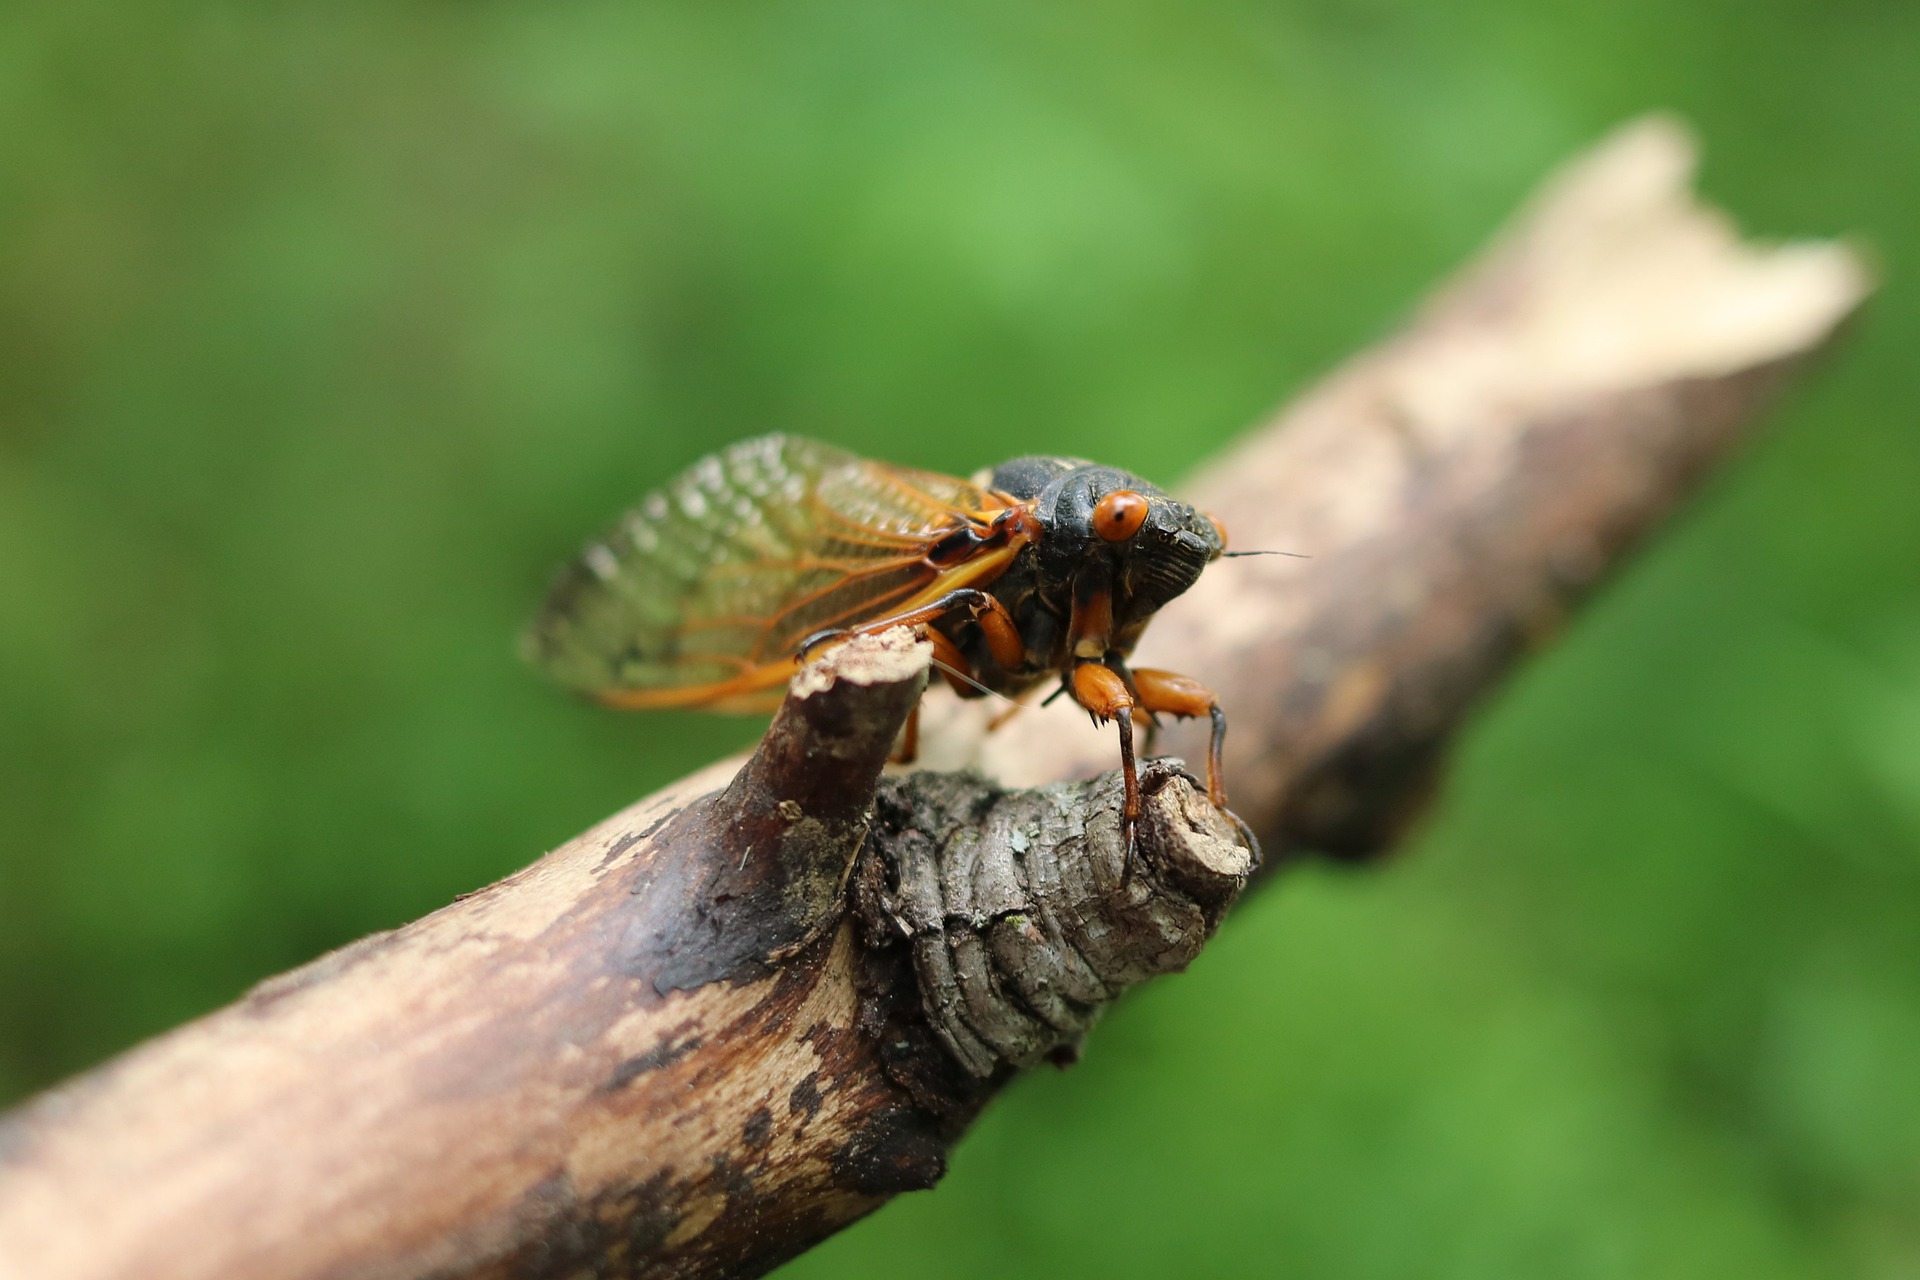 A red-eyed, black-bodied cicada with amber legs and wings perches on a brown stick facing towards the camera. The cicada's head is in sharp focus while the rest of the image blurs into the green background.